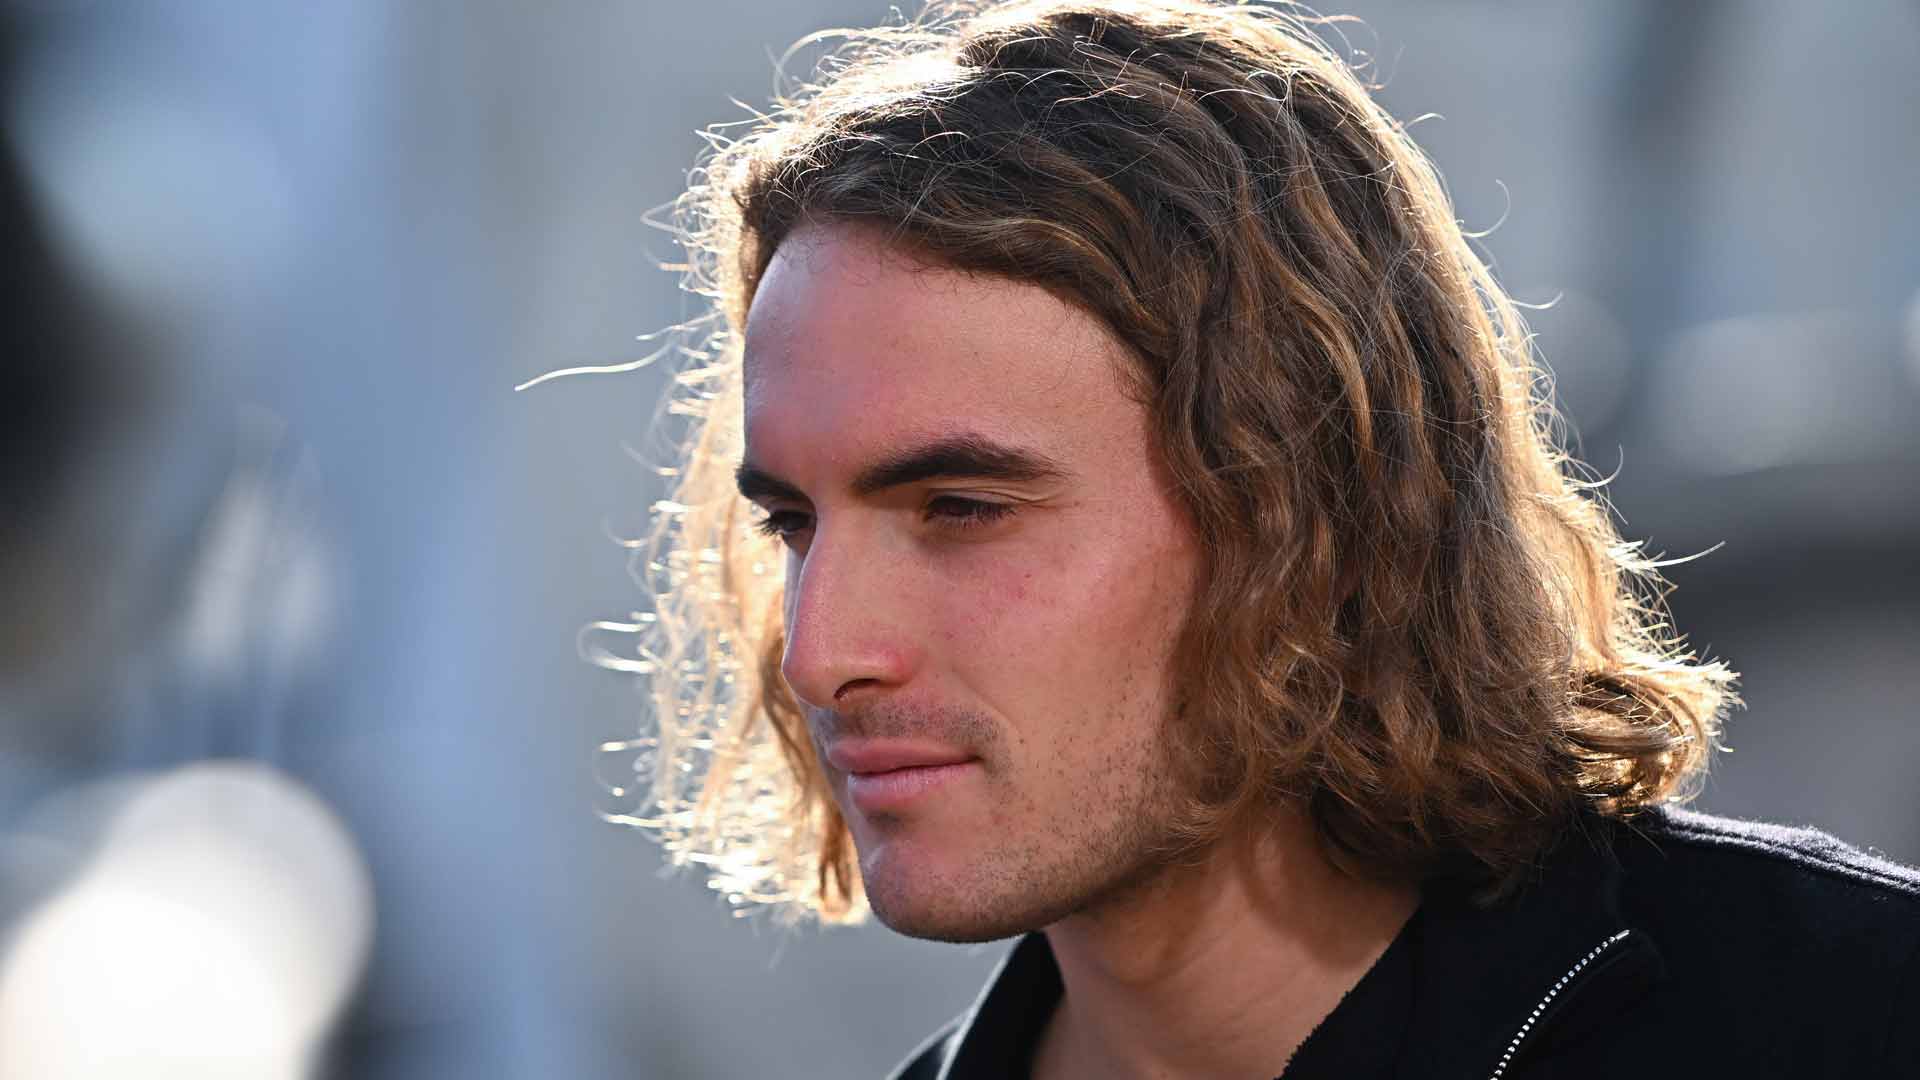 Stefanos Tsitsipas in Turin, Italy ahead of the 2022 Nitto ATP Finals.